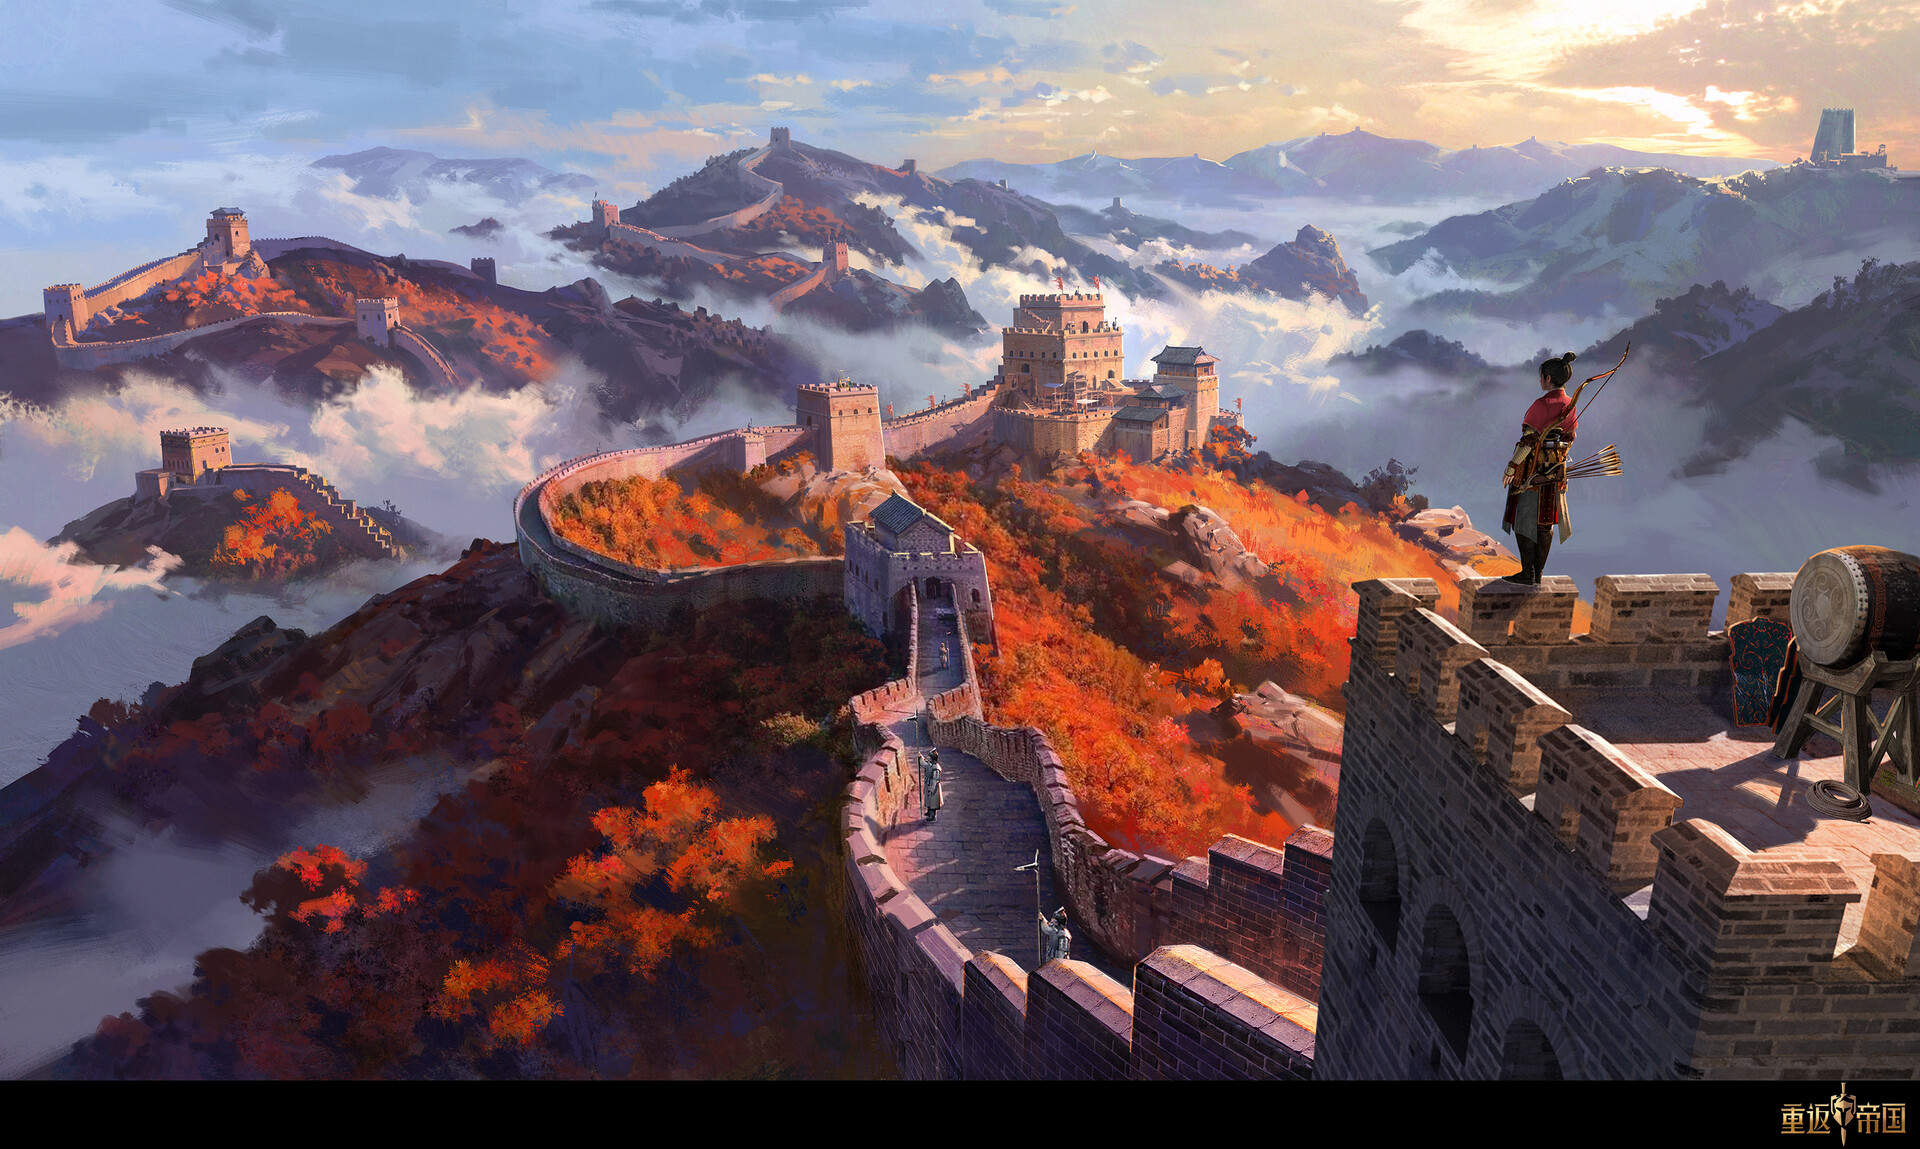 General 1920x1149 artwork digital art Great Wall of China nature mountains clouds